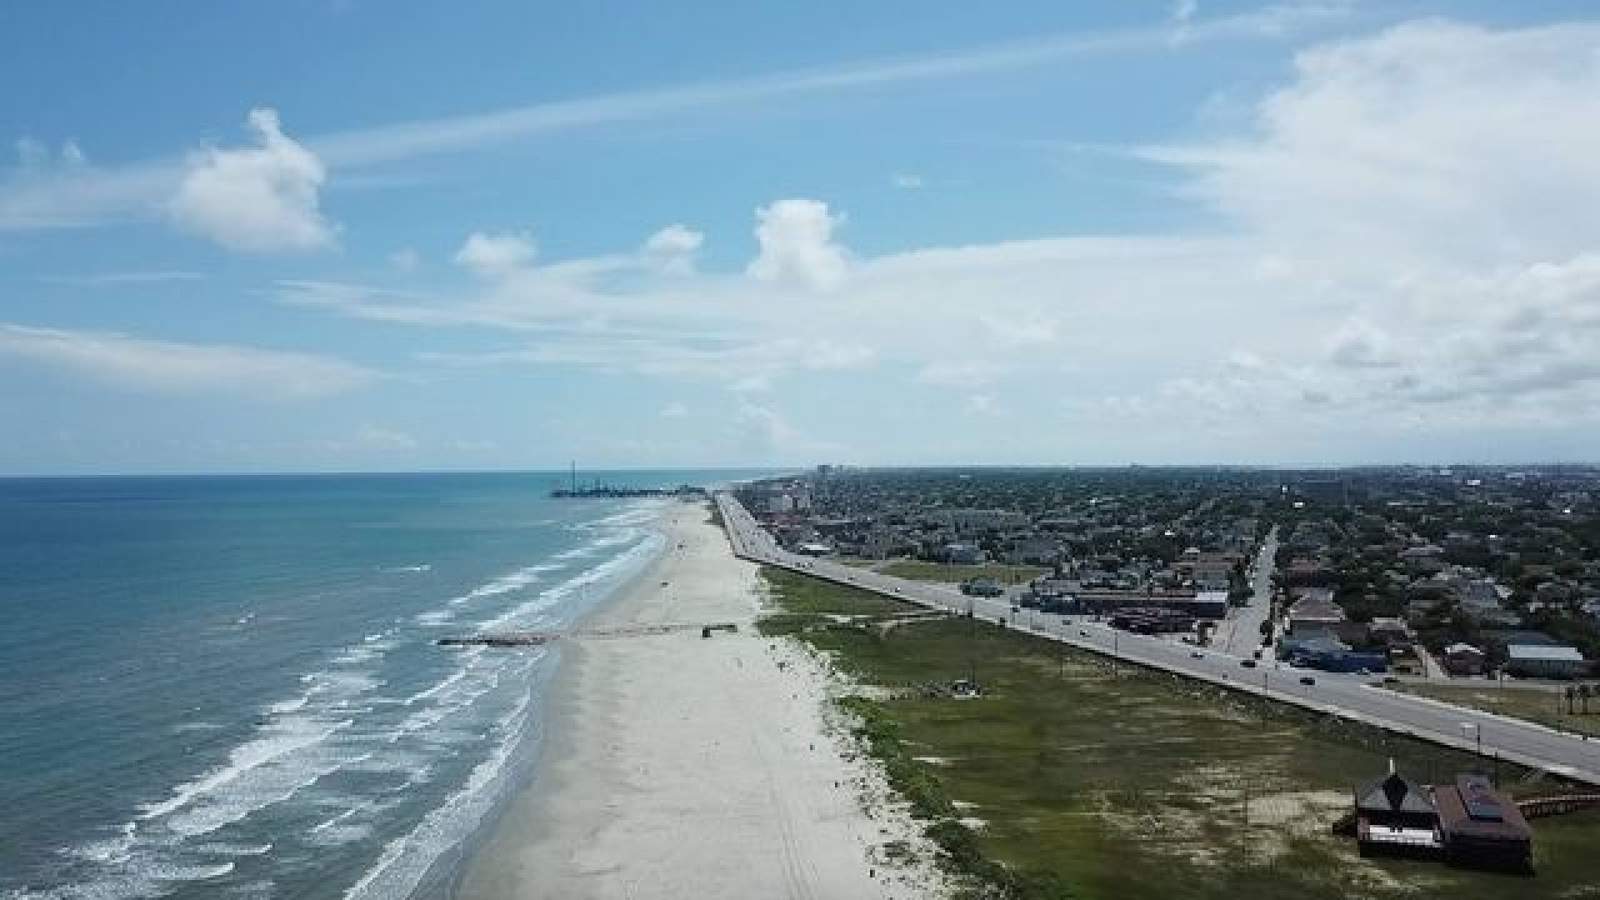 WATCH: See what it’s like in Galveston this morning as beachgoers head out